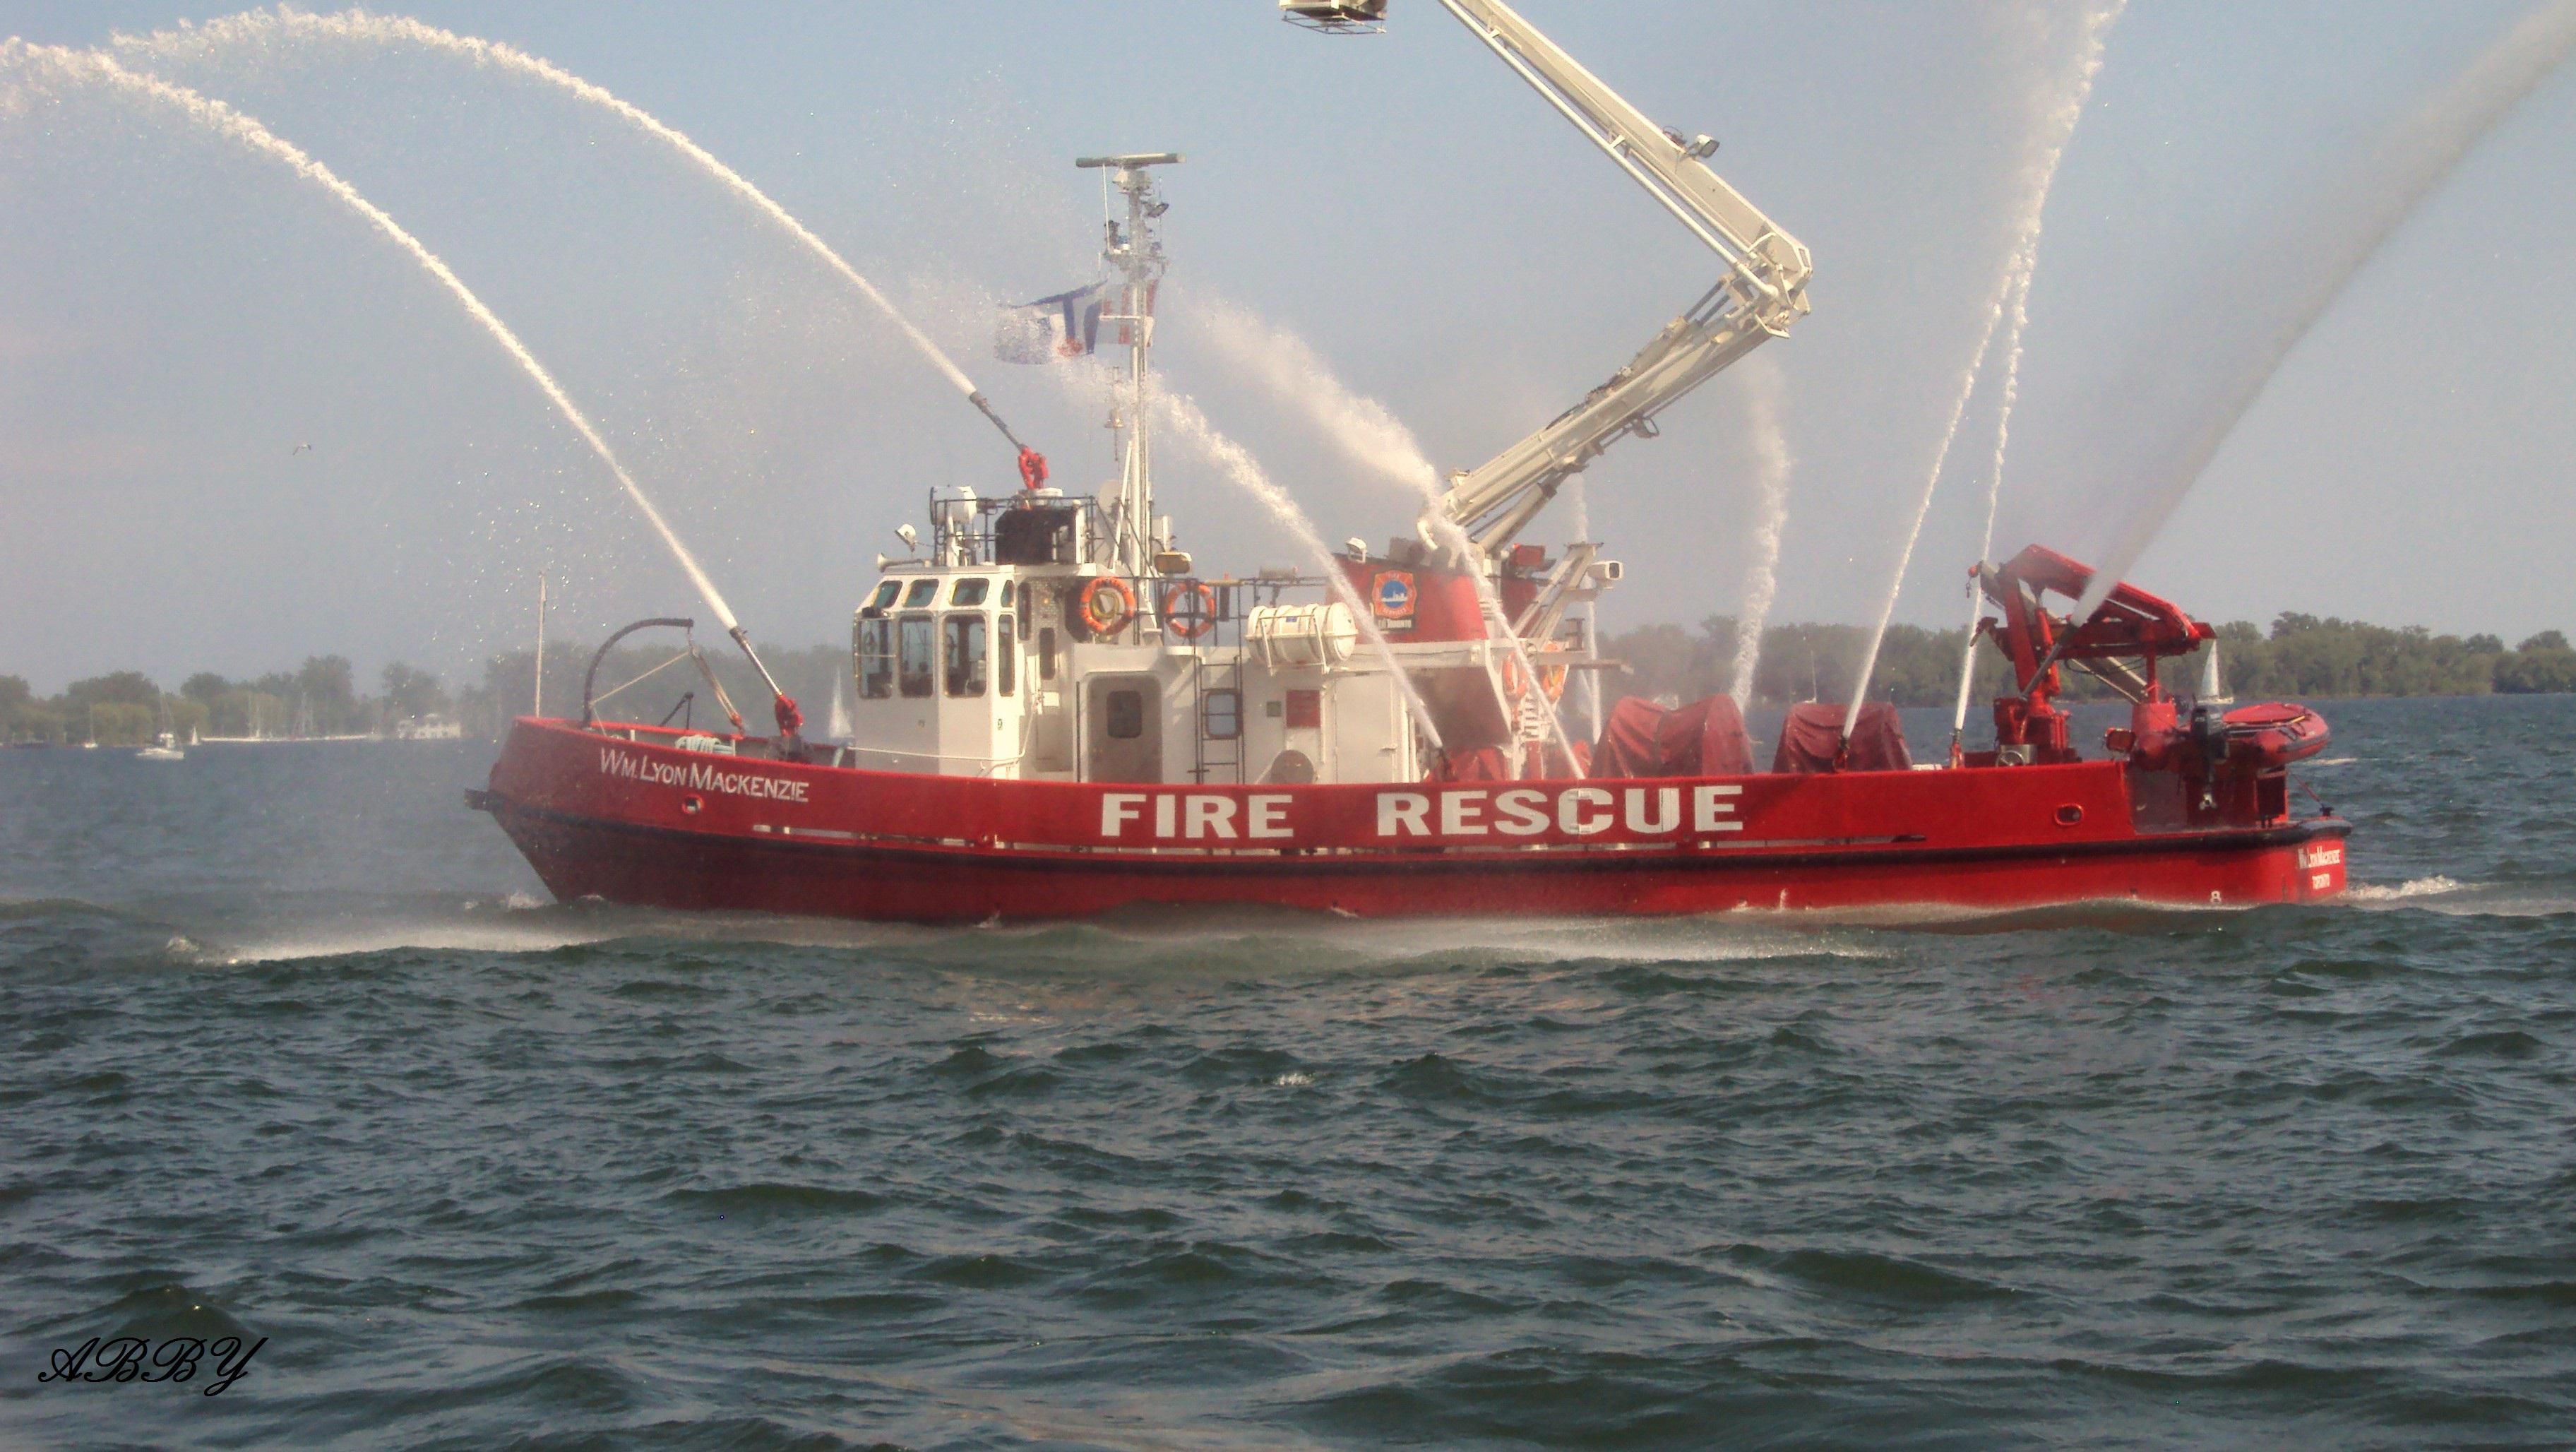 Fire rescue boats - - High Quality and Resolution